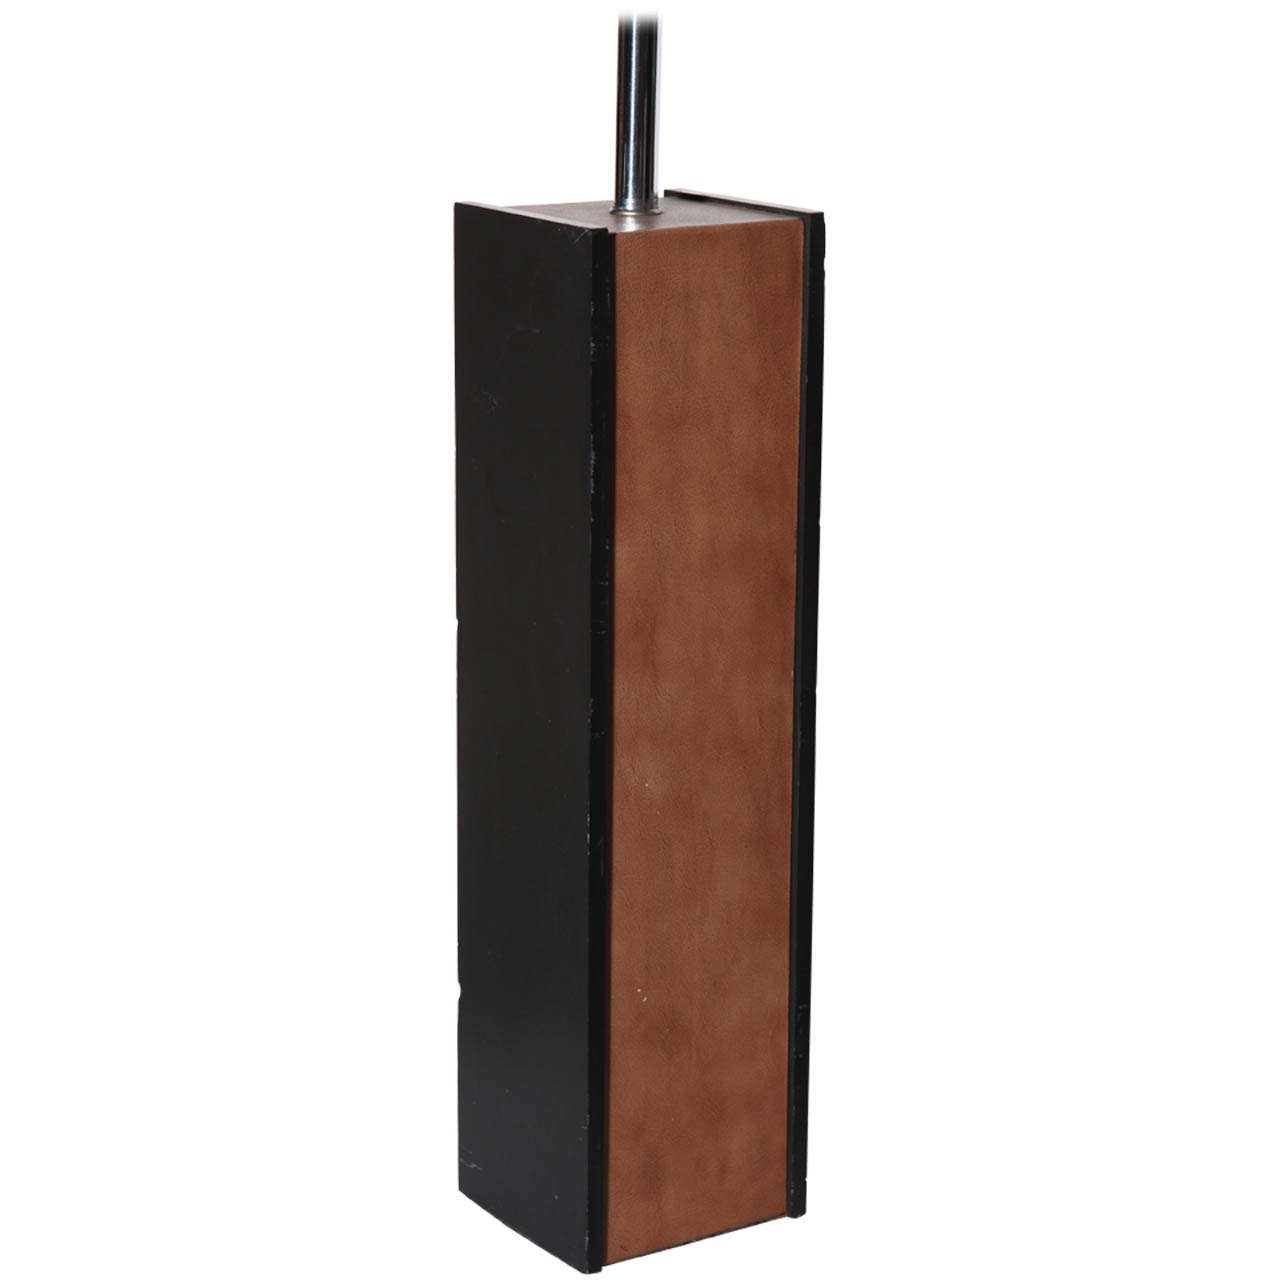 Tall Laurel Lamp Company Black Slate, Brown Leather, Chrome and Milk Glass Shade Table Lamp. Featuring a rectangular form with two sides covered in earthen Coffee Brown Leather and two sides in Black Slate. With a tubular chrome neck and milk glass